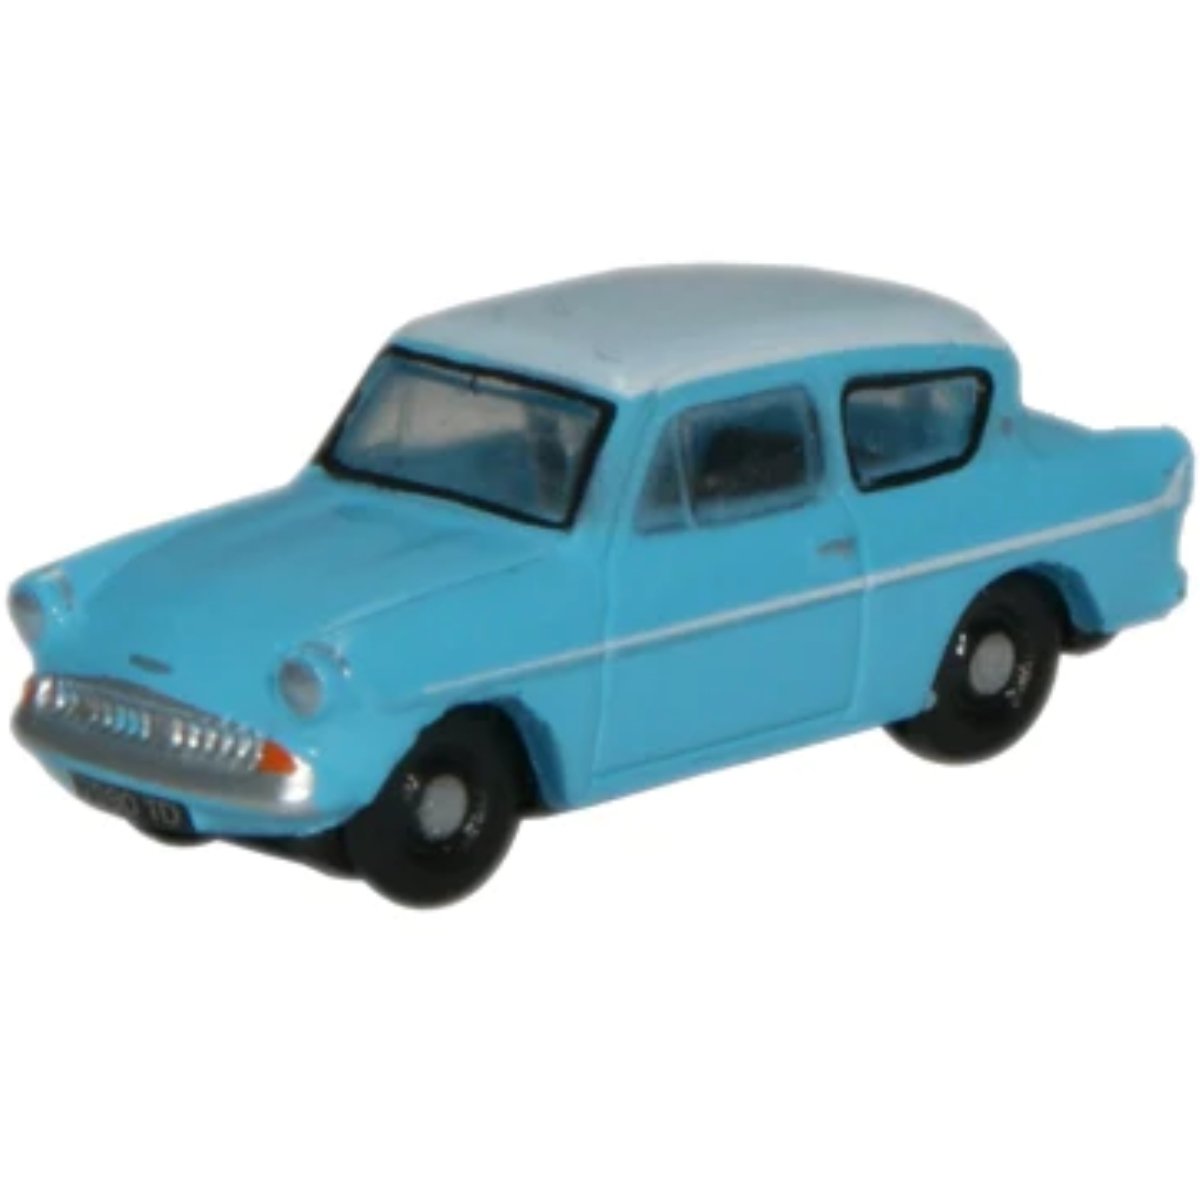 Oxford Diecast N105007 Caribbean Turquoise/White Ford Anglia - Phillips Hobbies